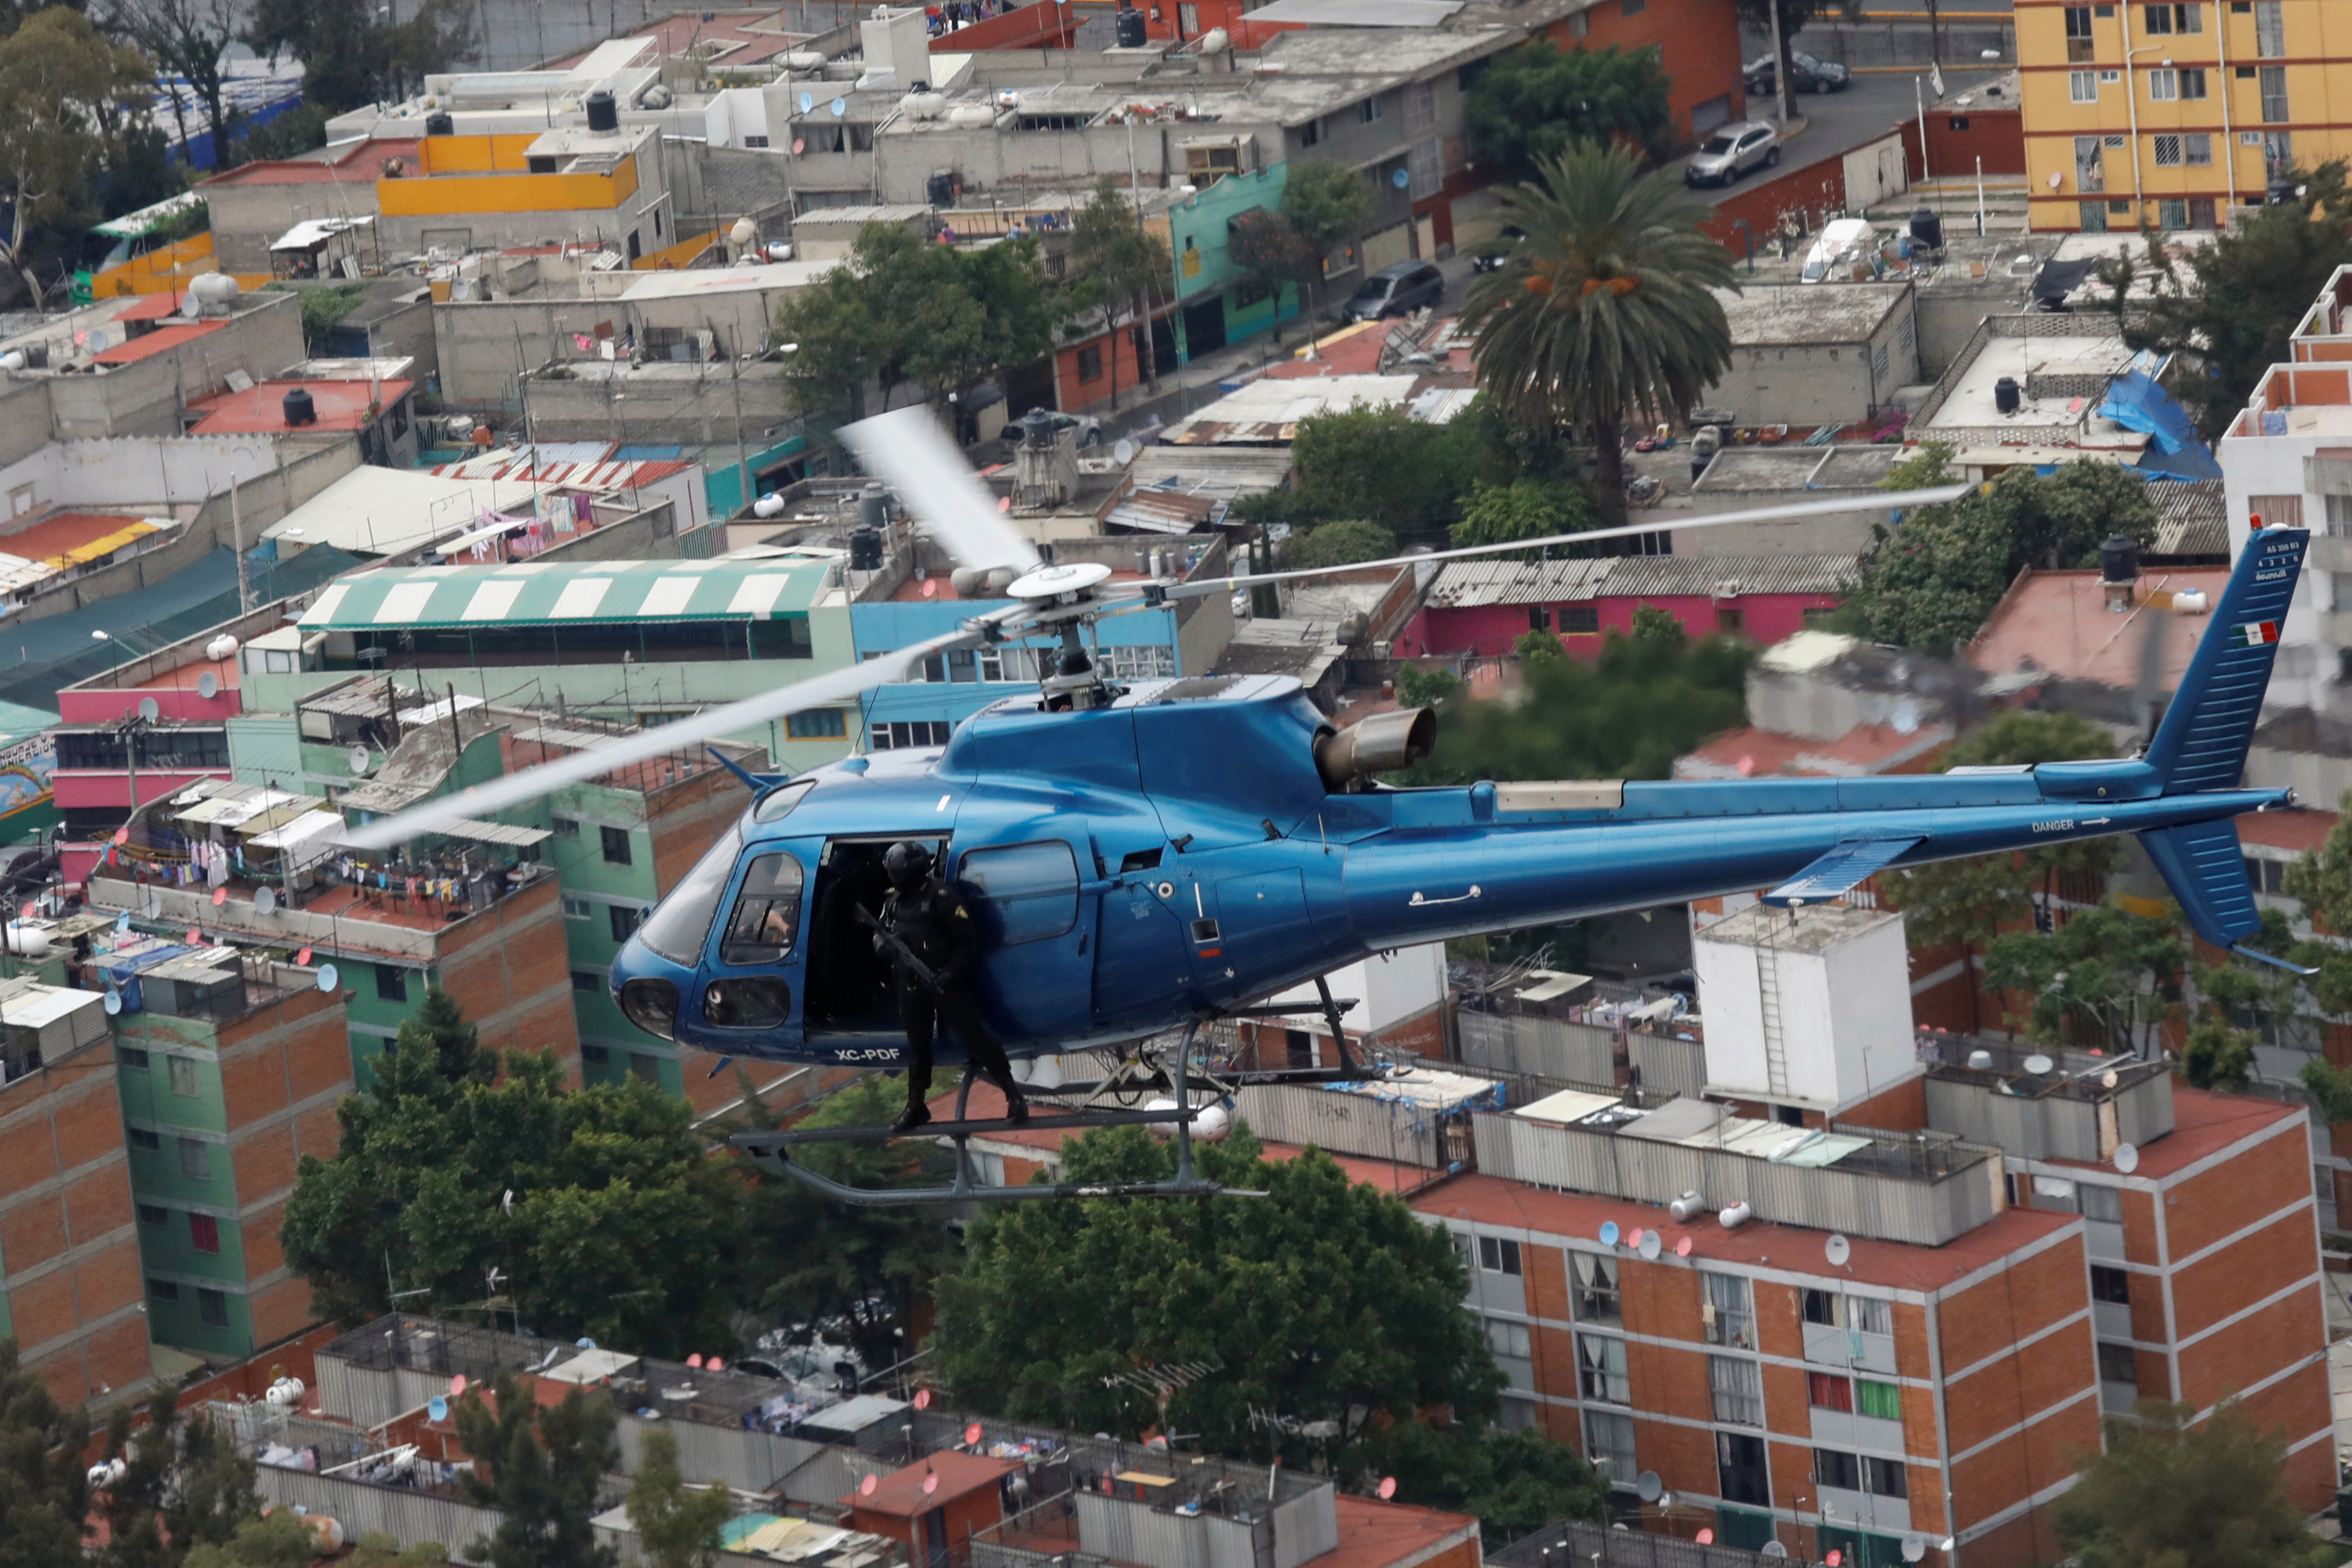 Police officers, members of a team known as "Condores", stand by the door of the helicopter during a patrol of the city, part of a new strategy to combat the crime in Mexico City, Mexico August 3, 2018. Picture taken August 3, 2018. REUTERS/Carlos Jasso - RC1ADE095290